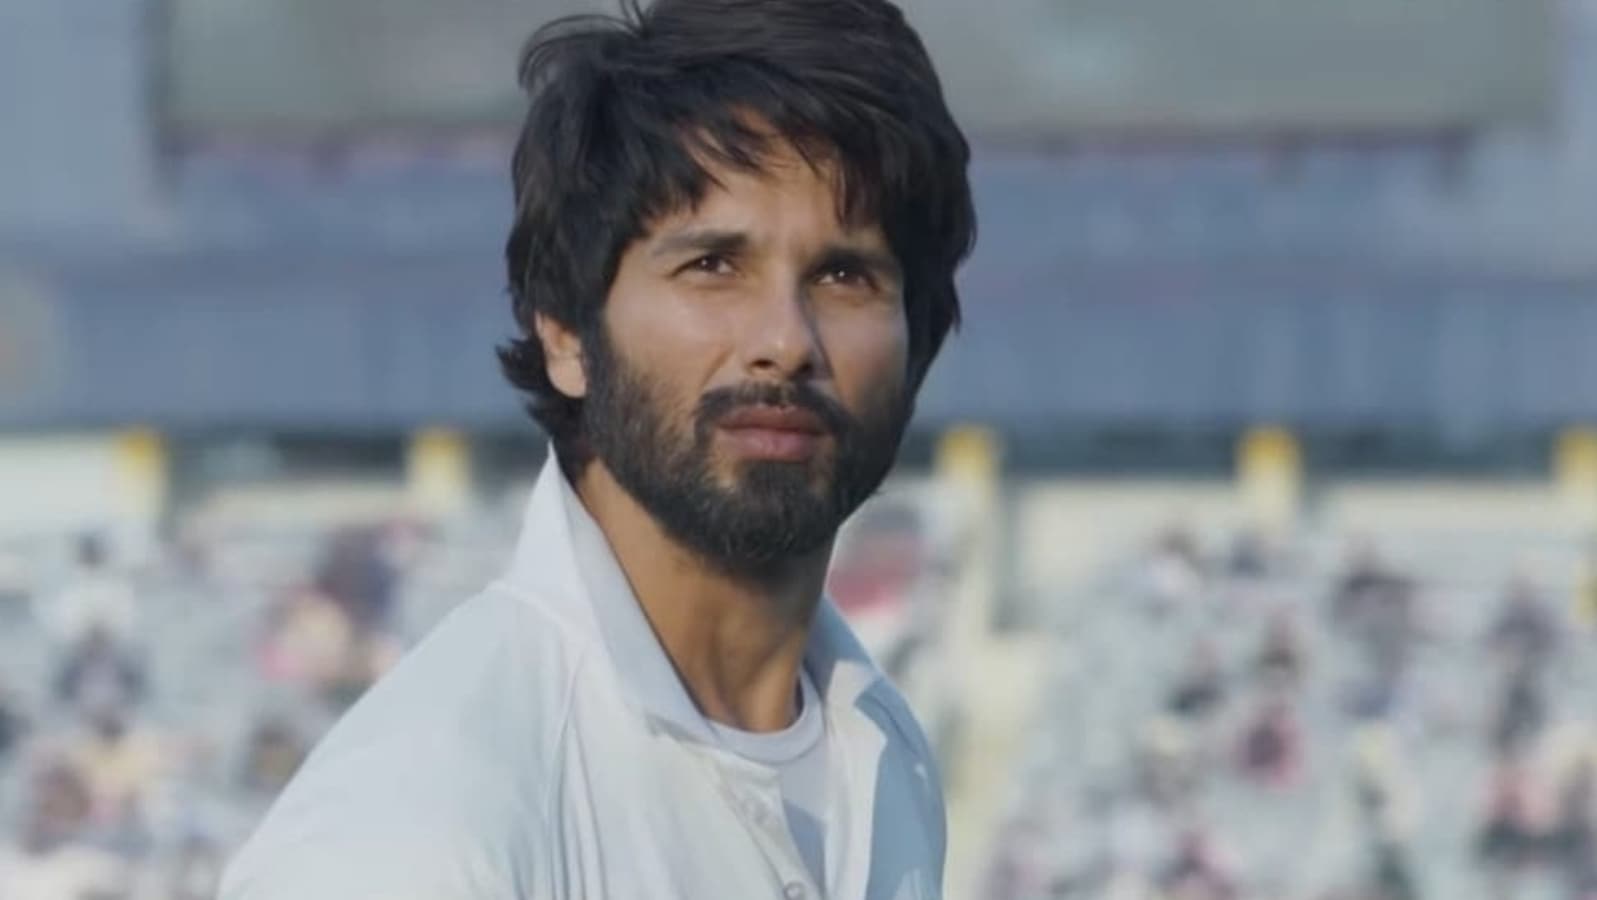 New shahid kapoor hairstyle images Quotes, Status, Photo, Video | Nojoto